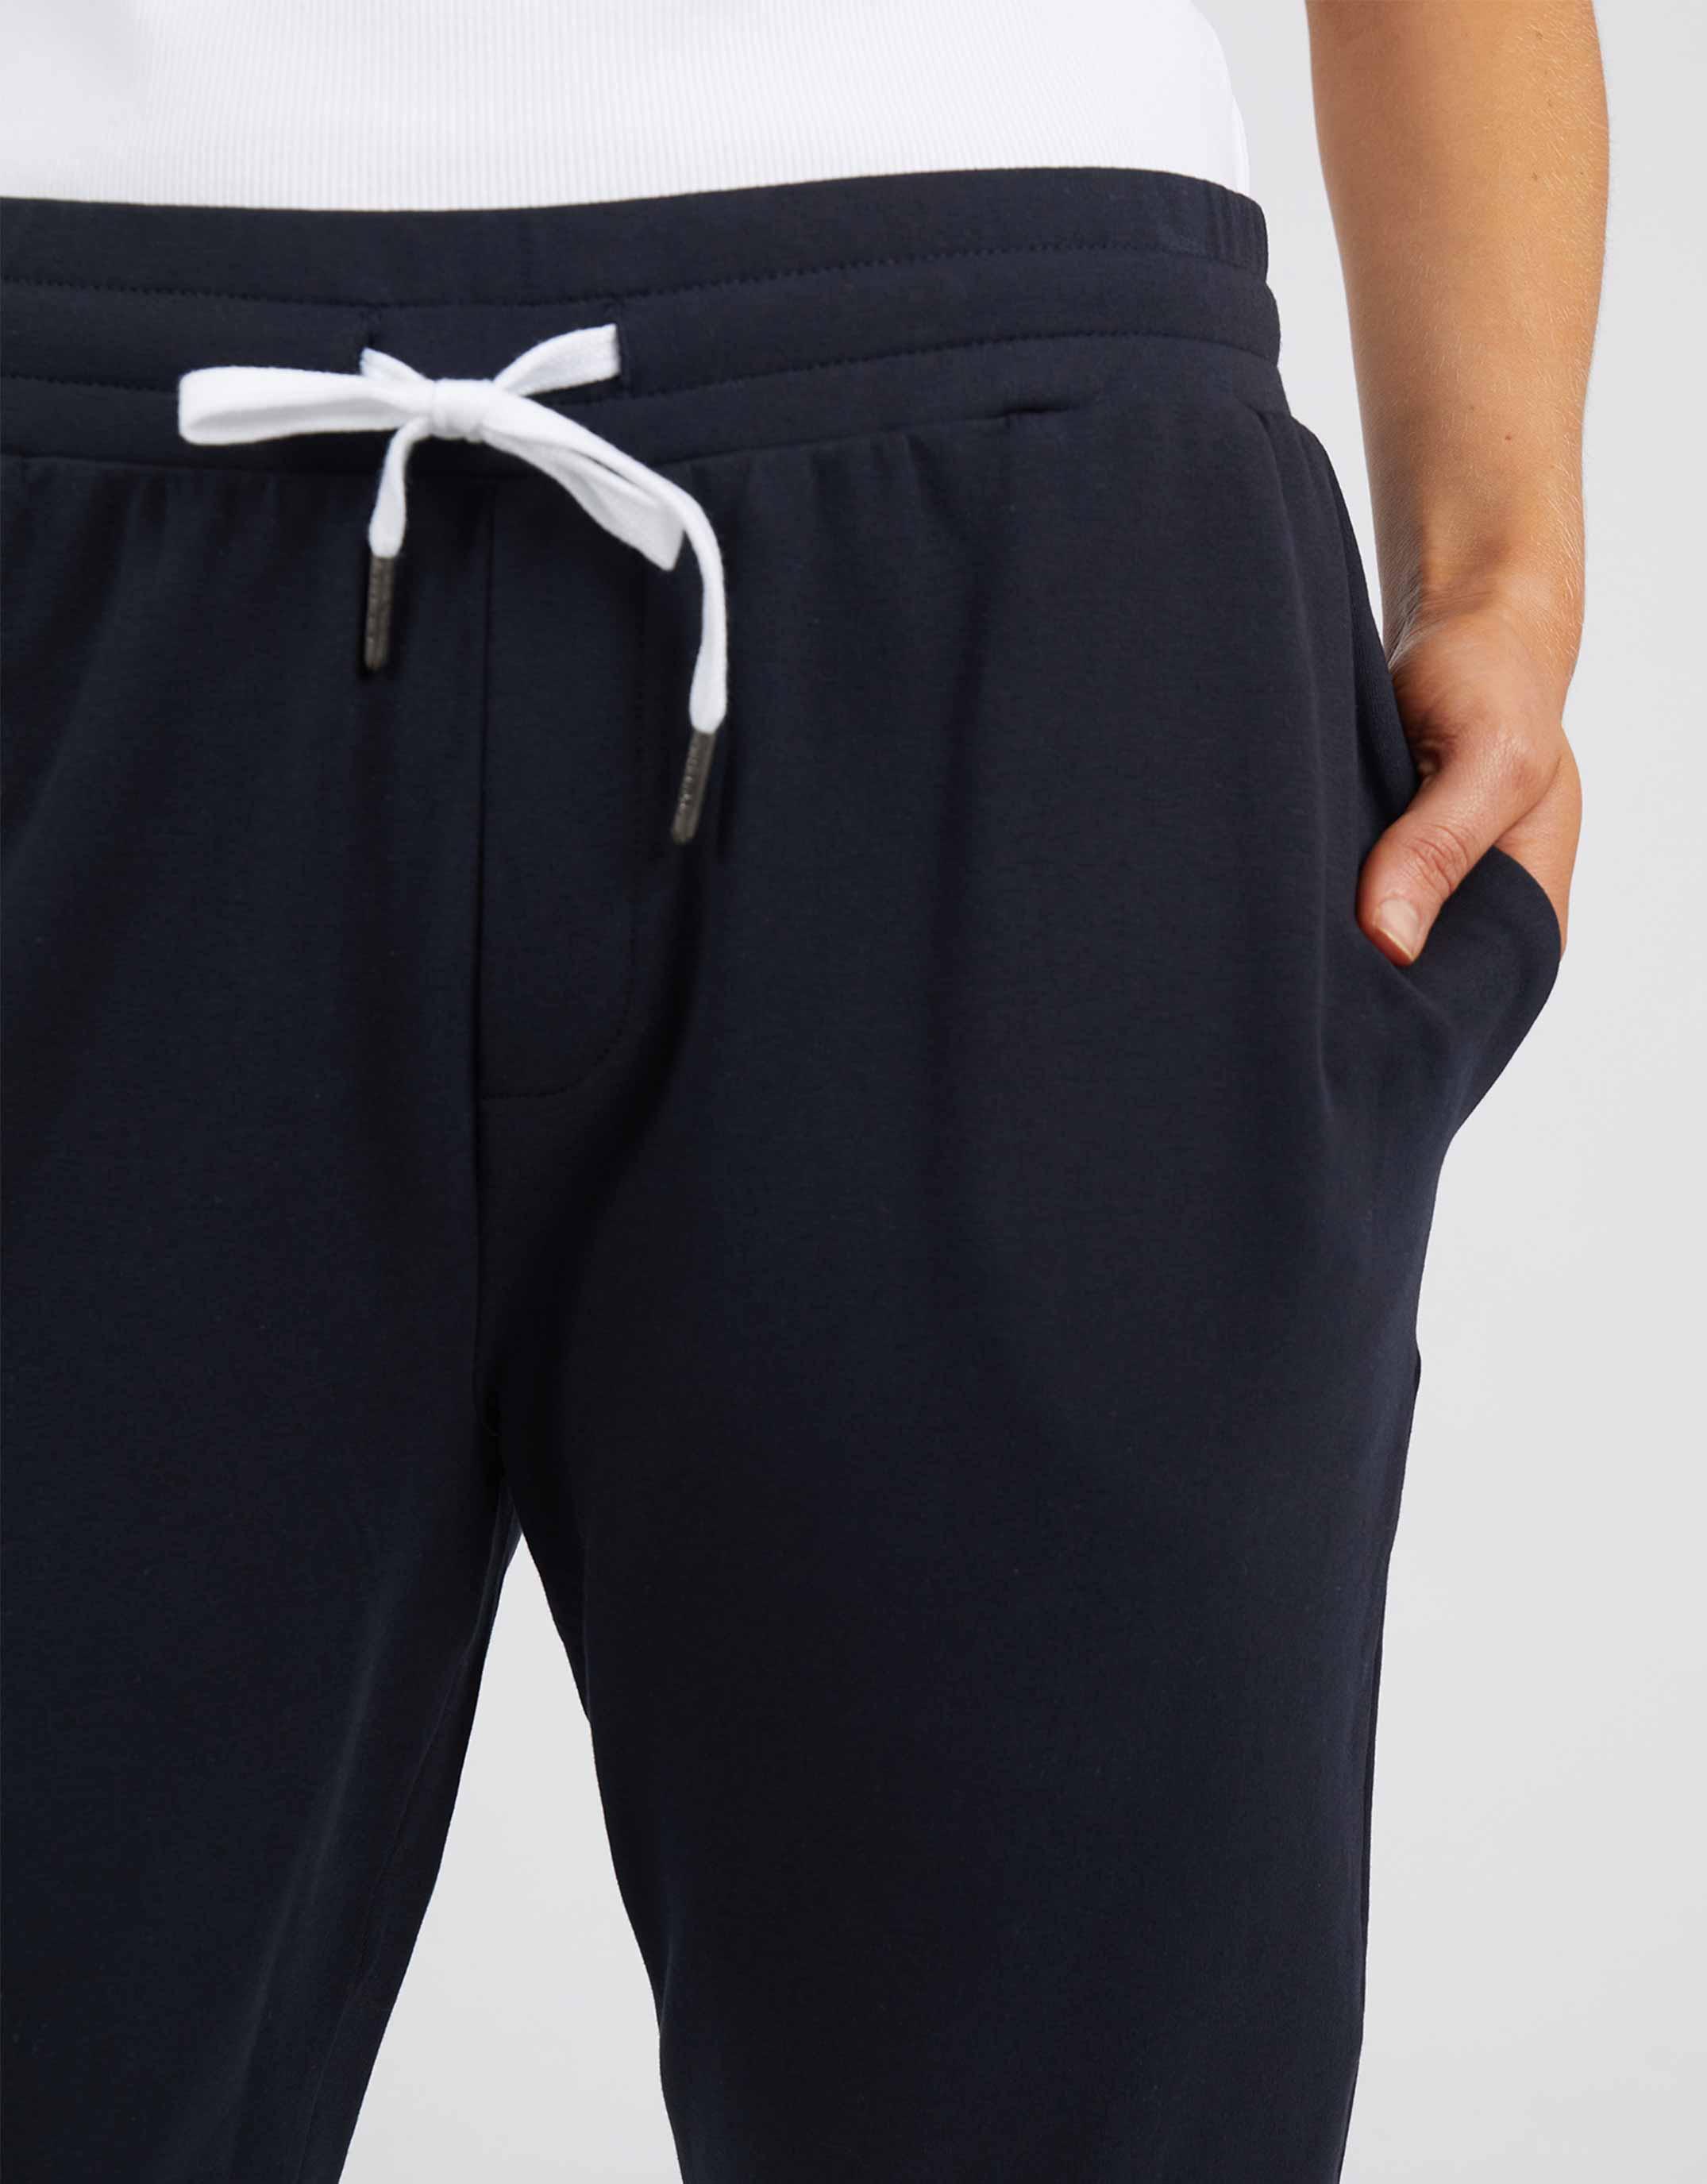 Buy The Lobby Pant - Black Elm for Sale Online New Zealand | White & Co.